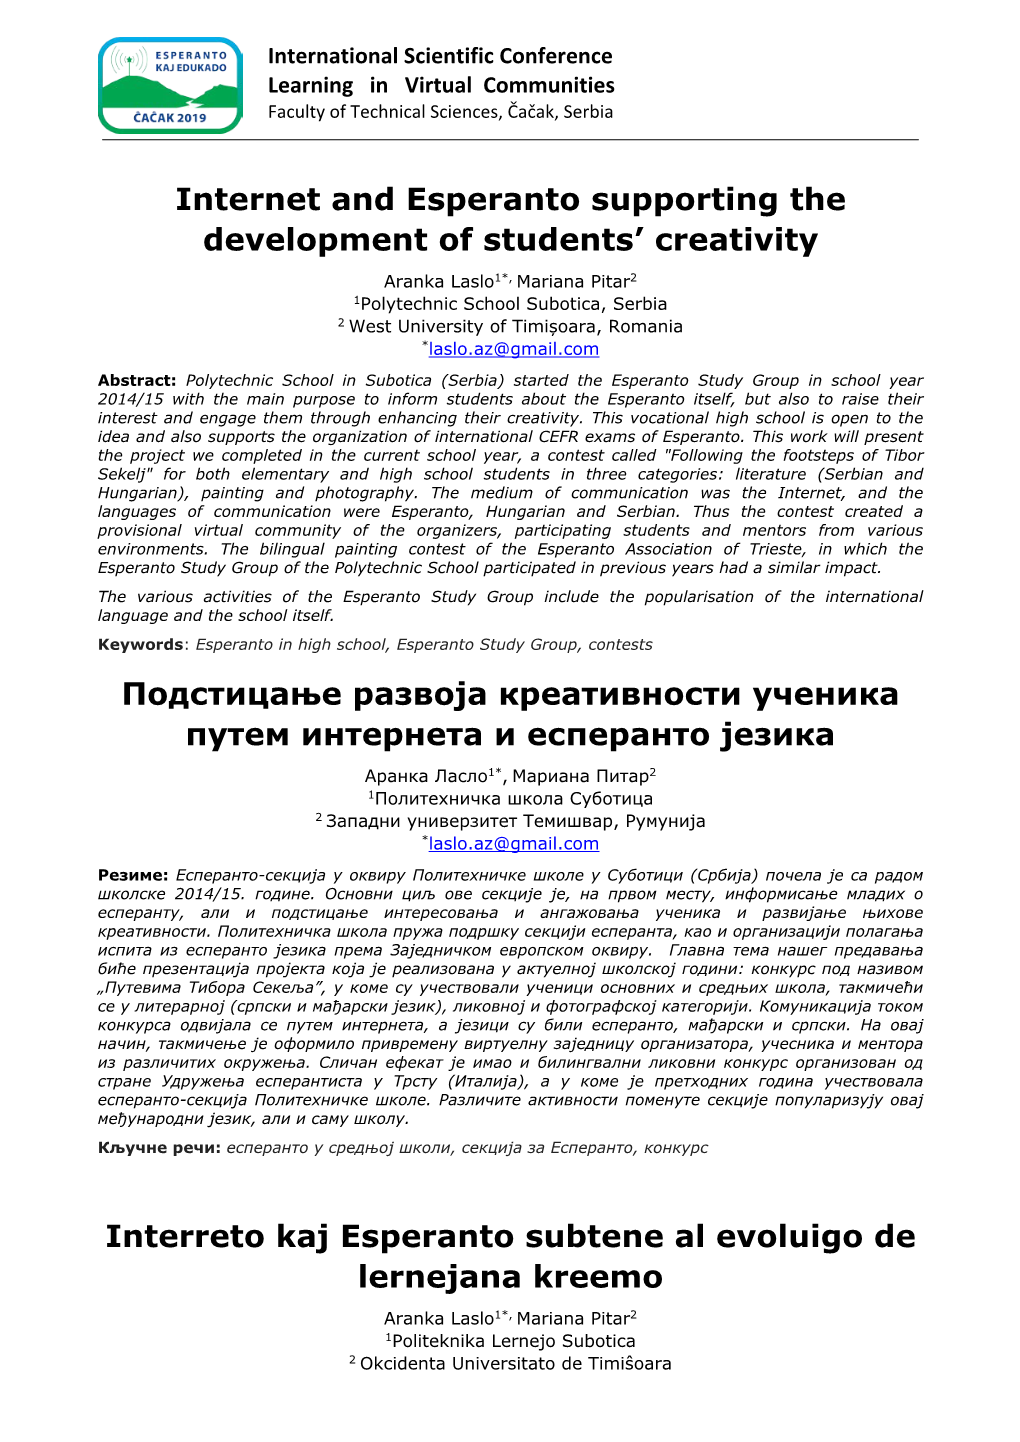 Internet and Esperanto Supporting the Development of Students' Creativity